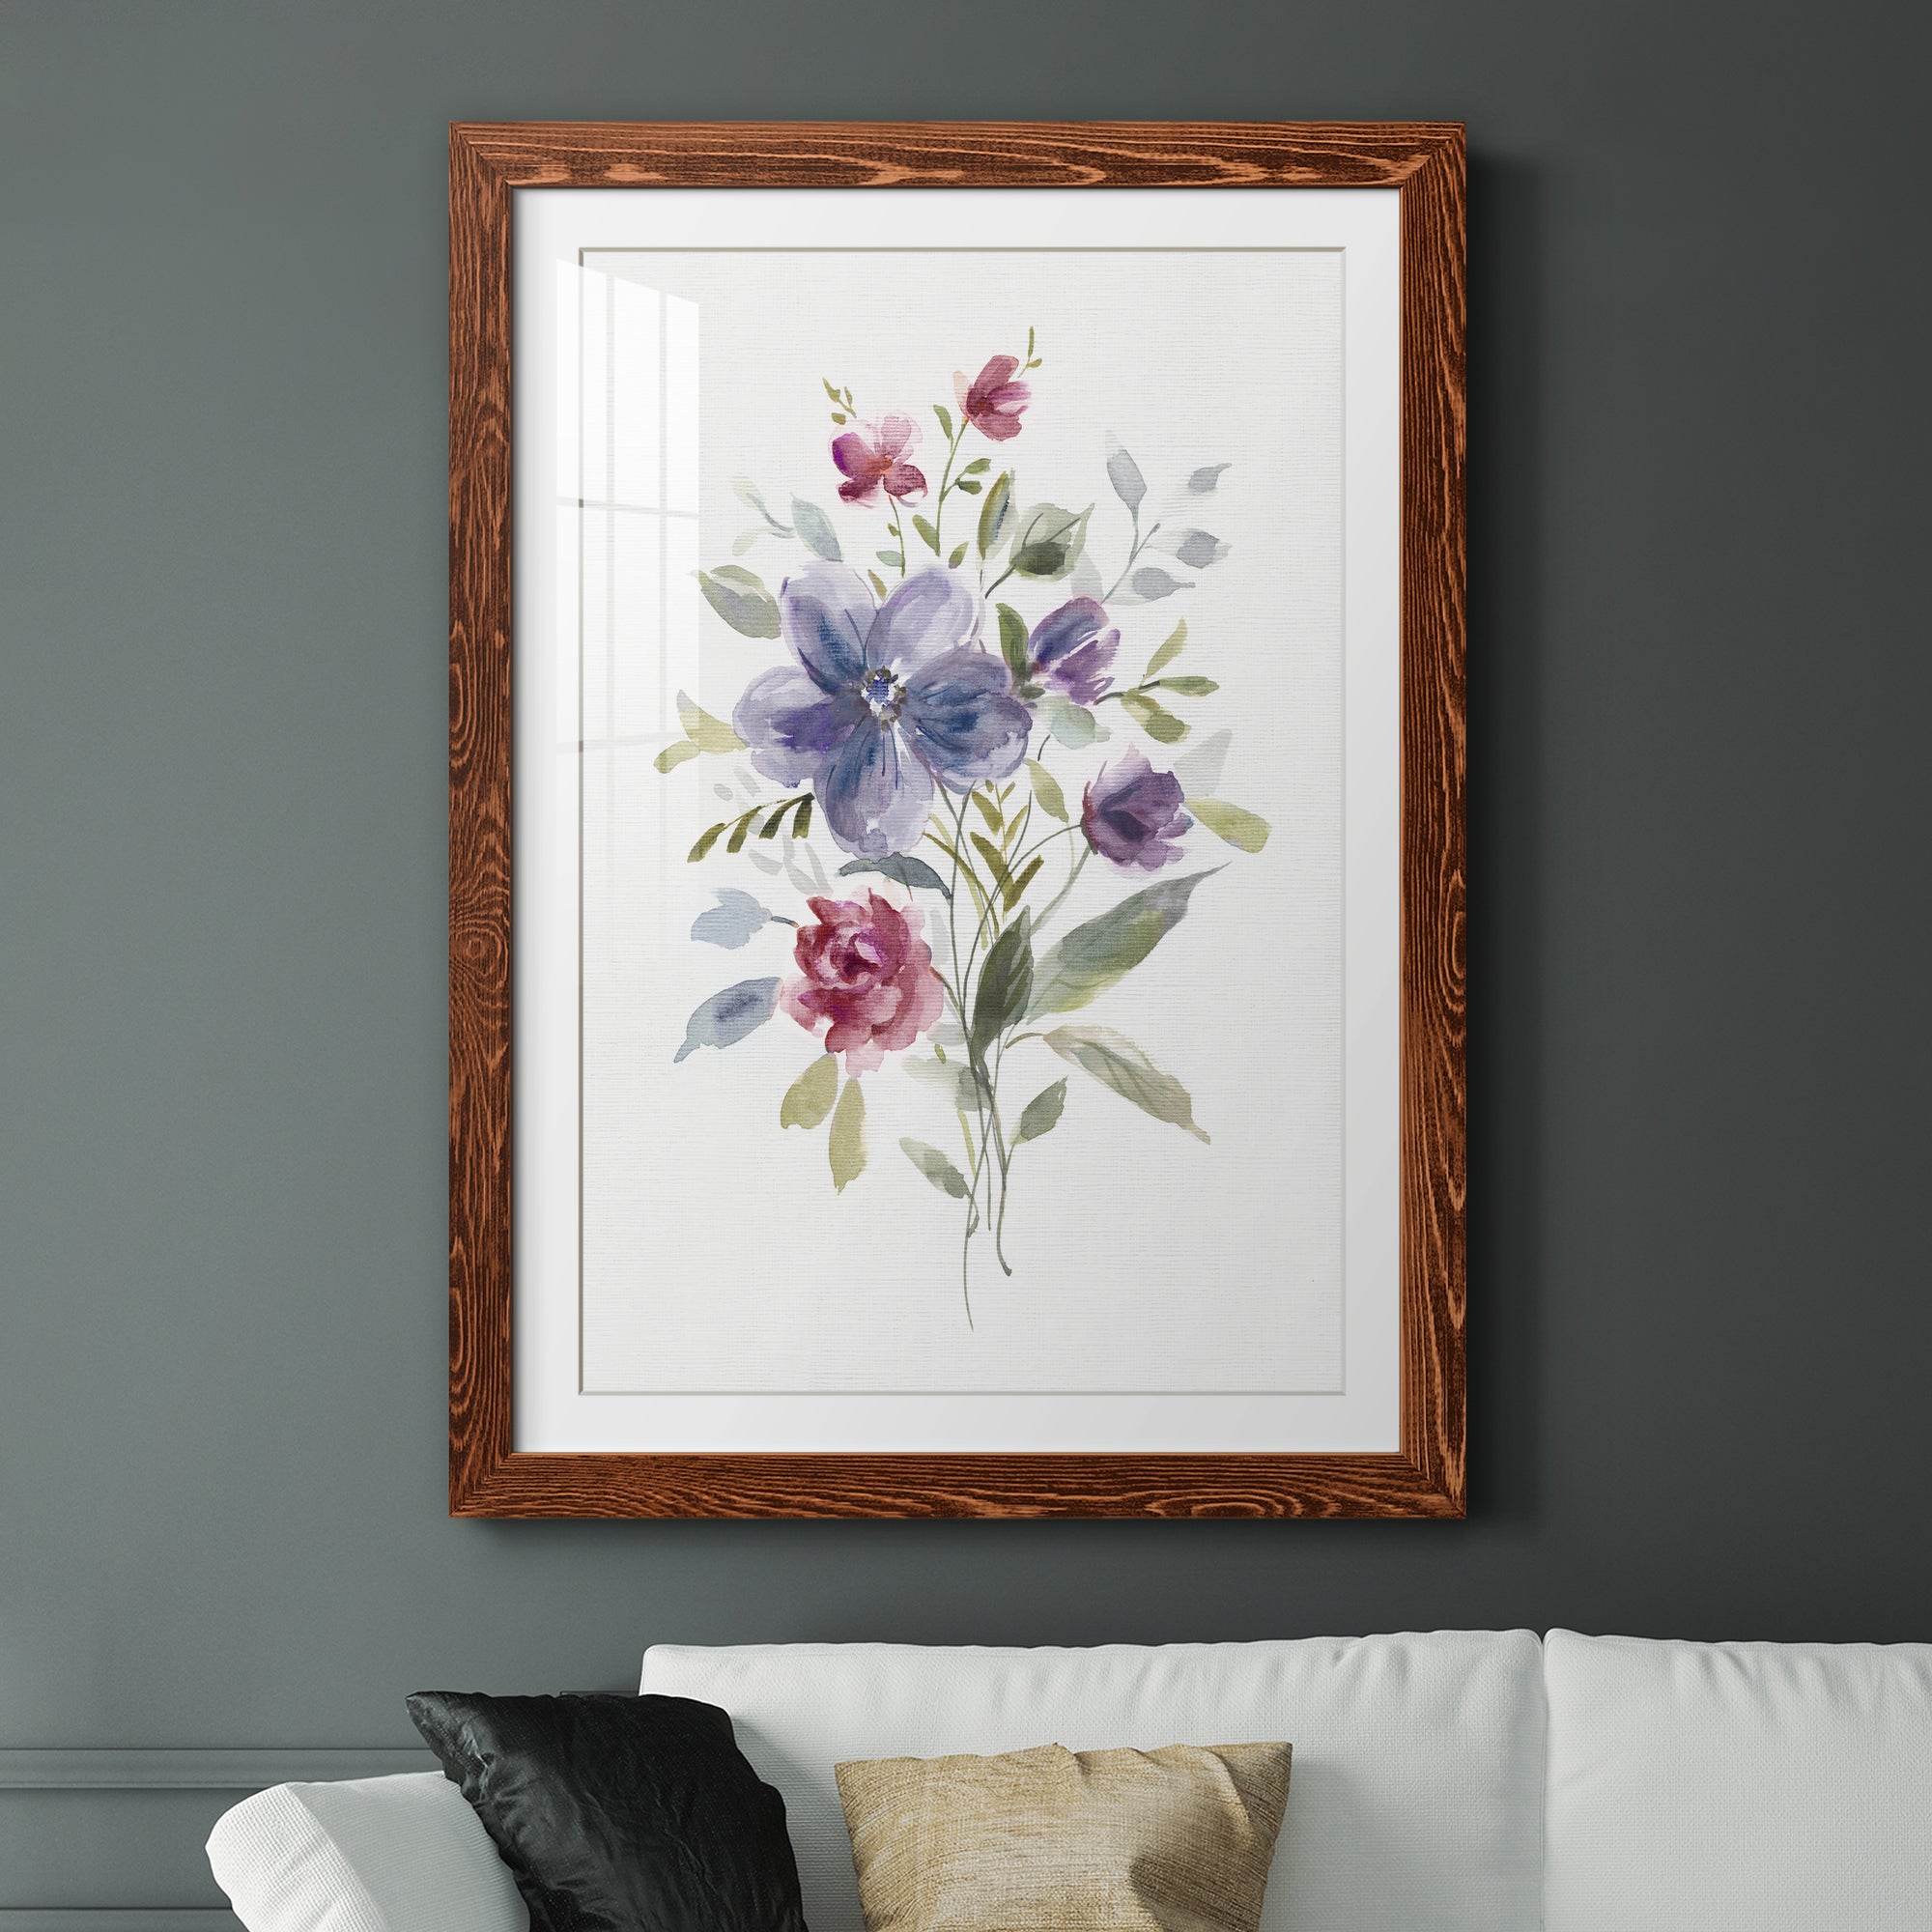 Color Variety II - Premium Framed Print - Distressed Barnwood Frame - Ready to Hang